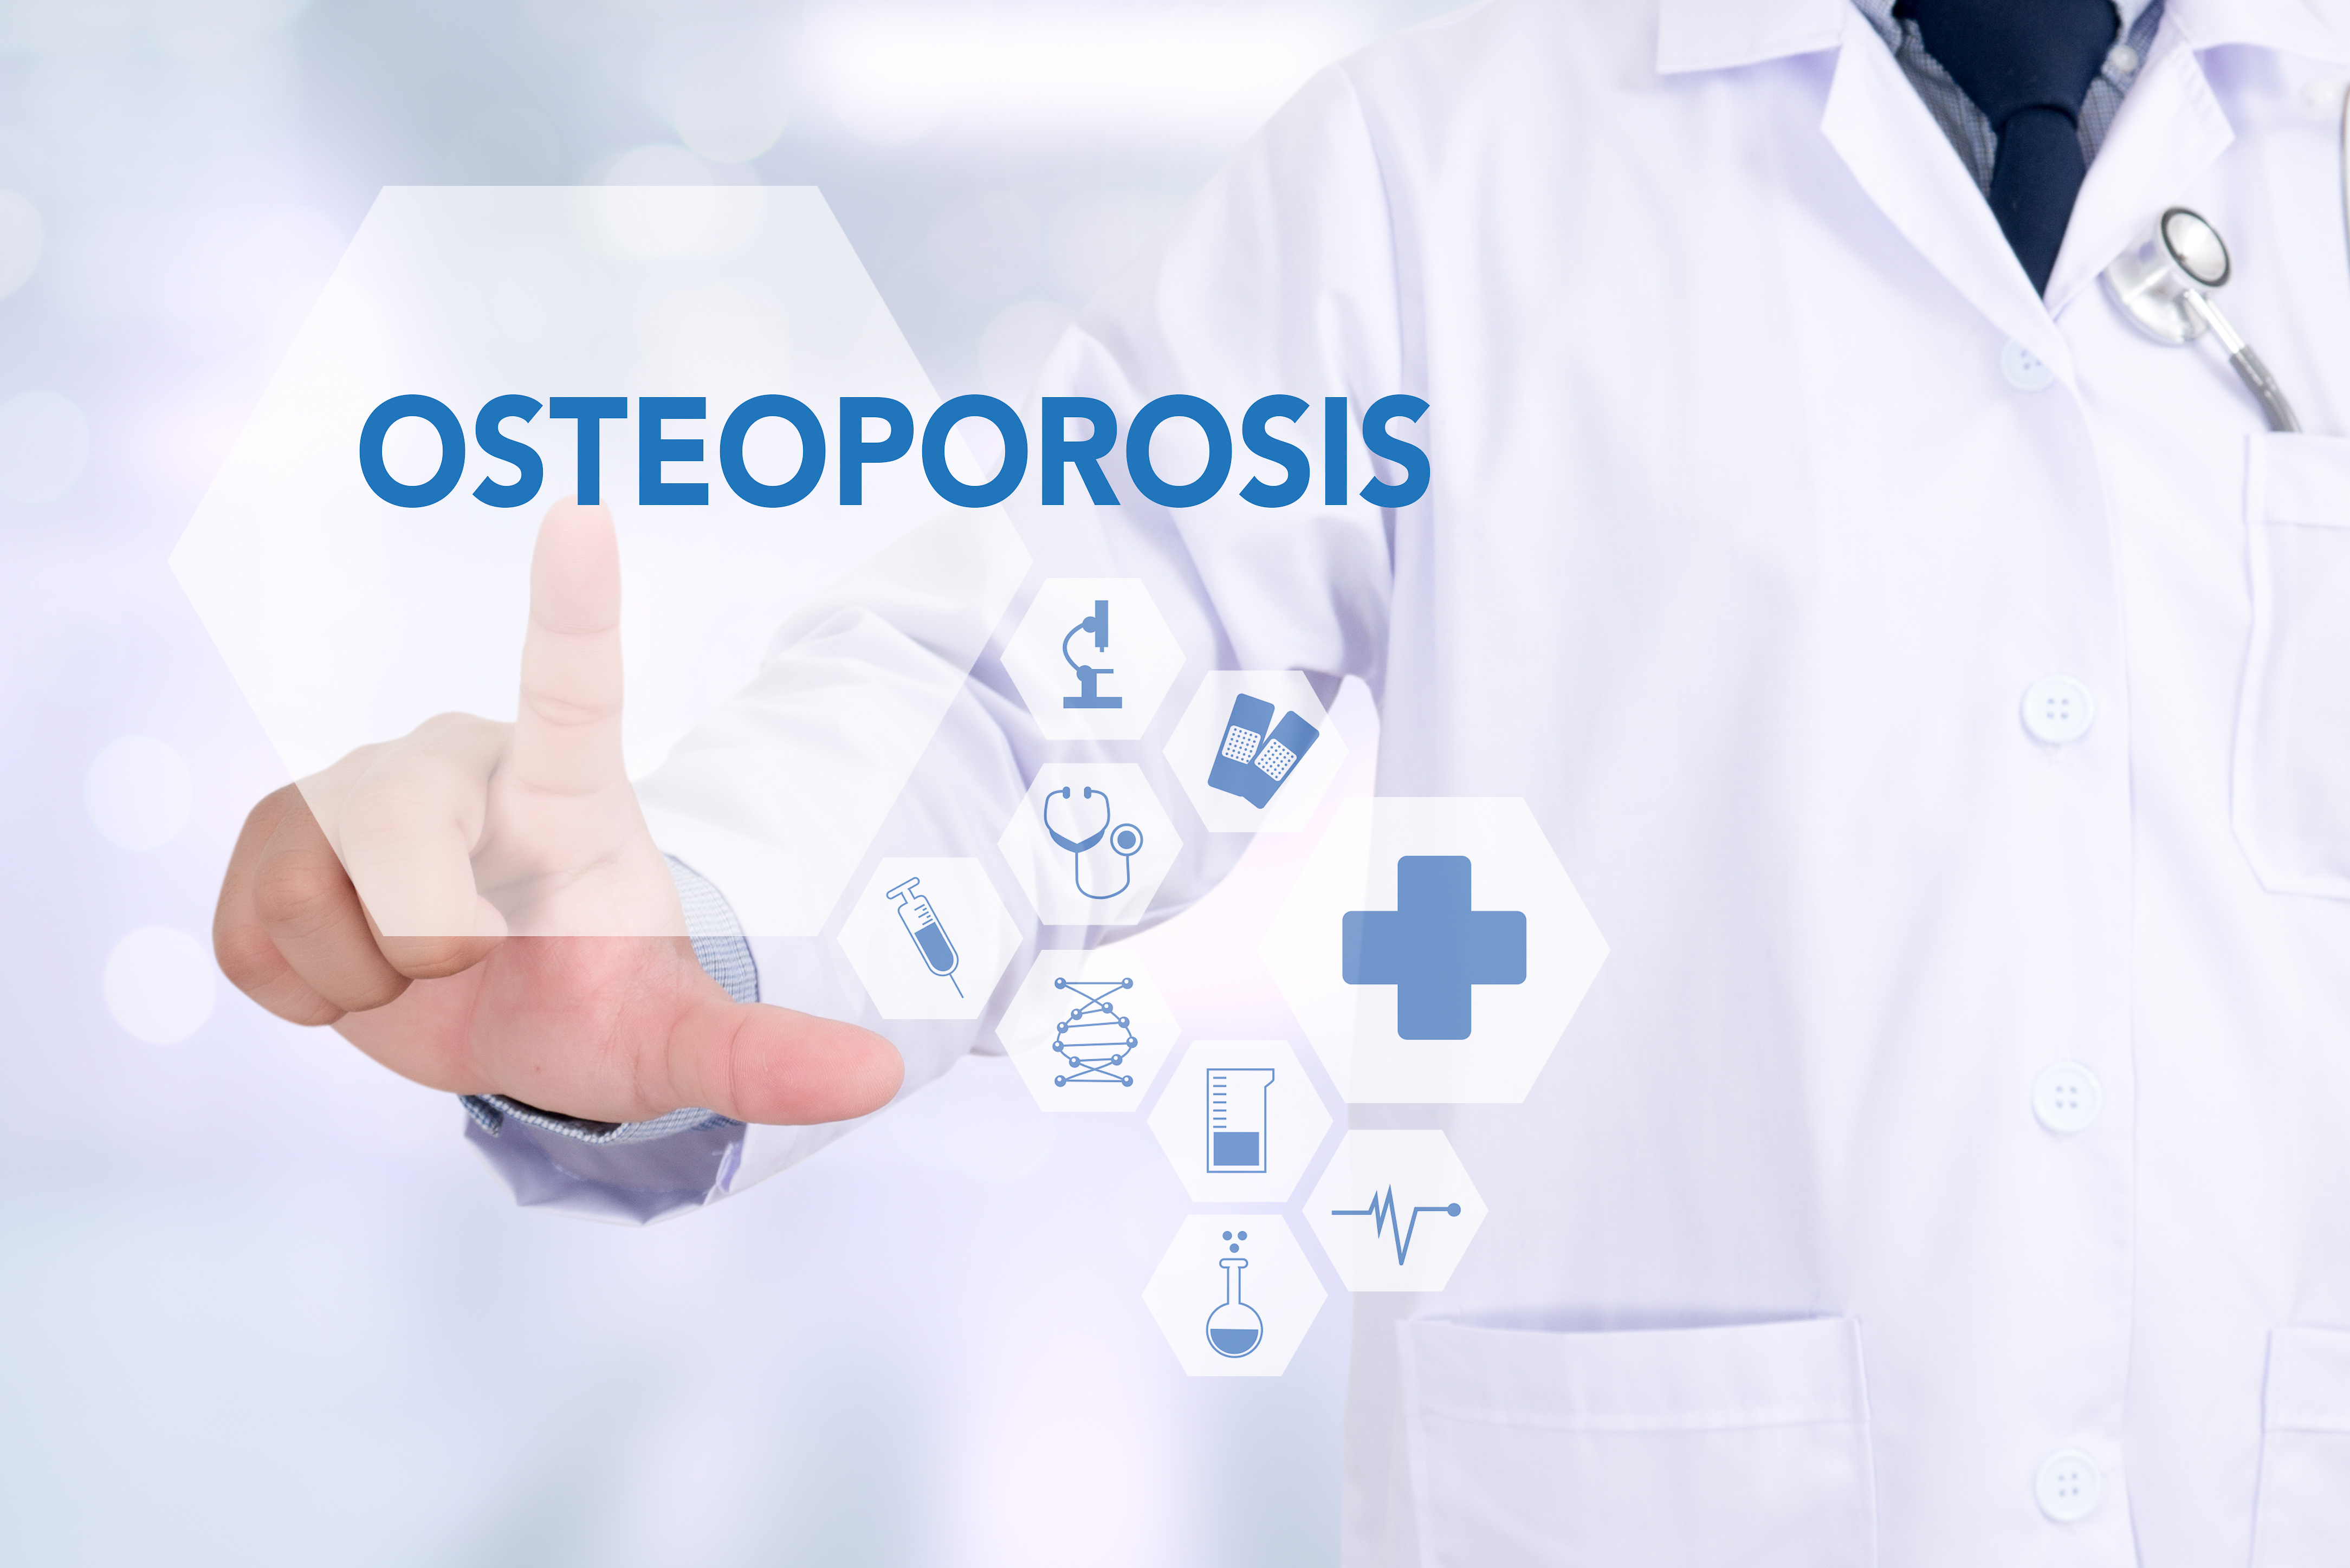 life-insurance-with-osteoporosis-concept